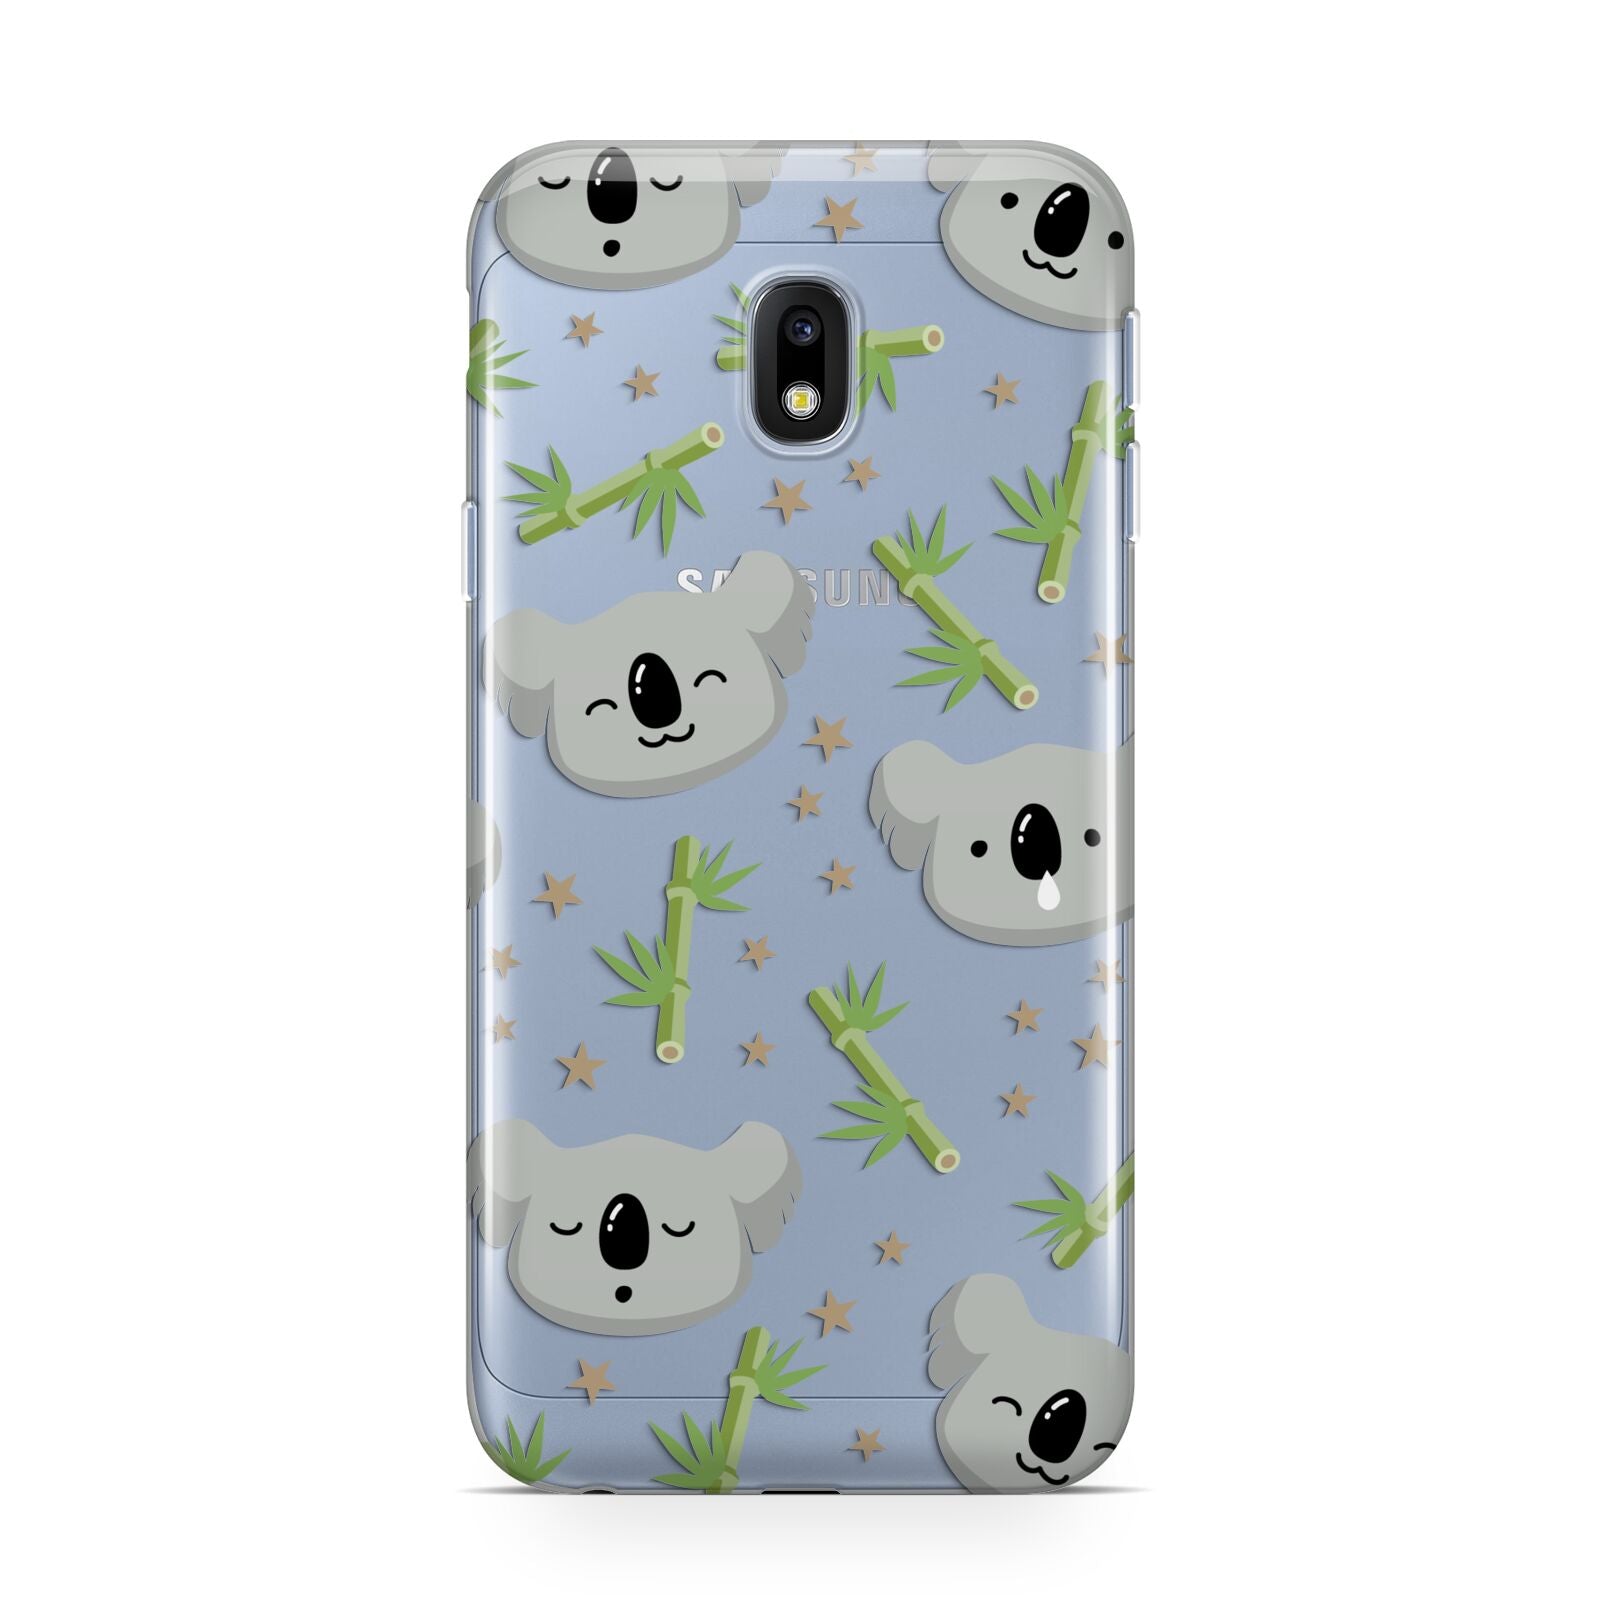 Koala Faces with Transparent Background Samsung Galaxy J3 2017 Case